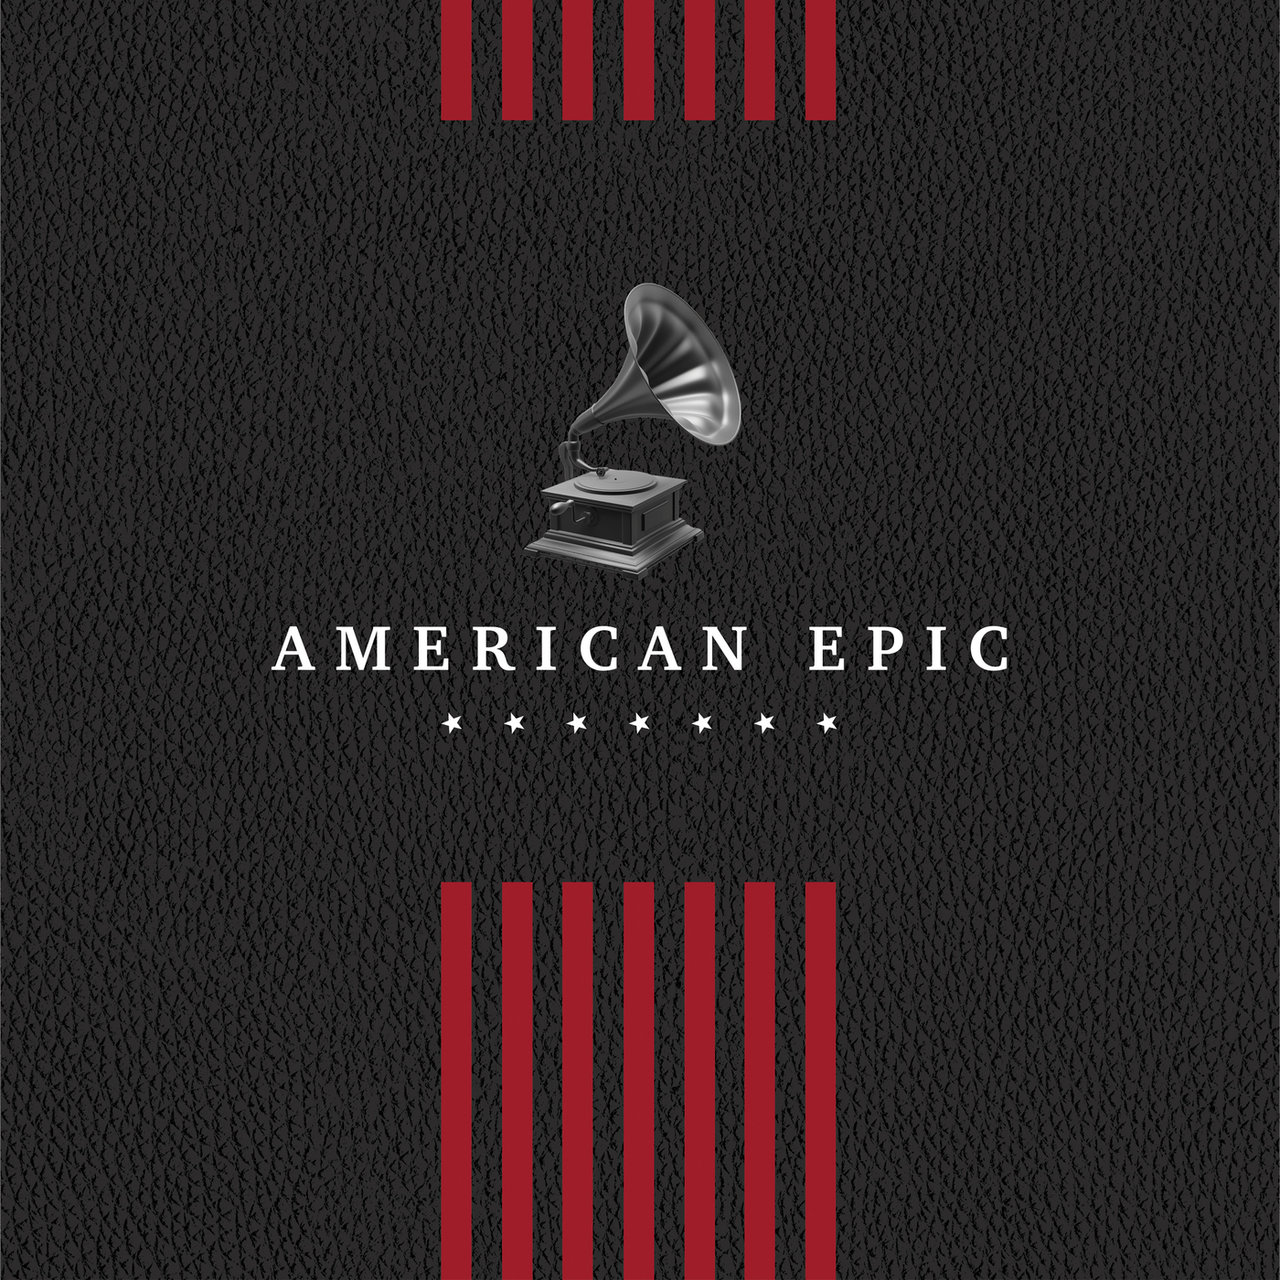 VA – American Epic: The Collection (2017) [FLAC 24bit/96kHz]